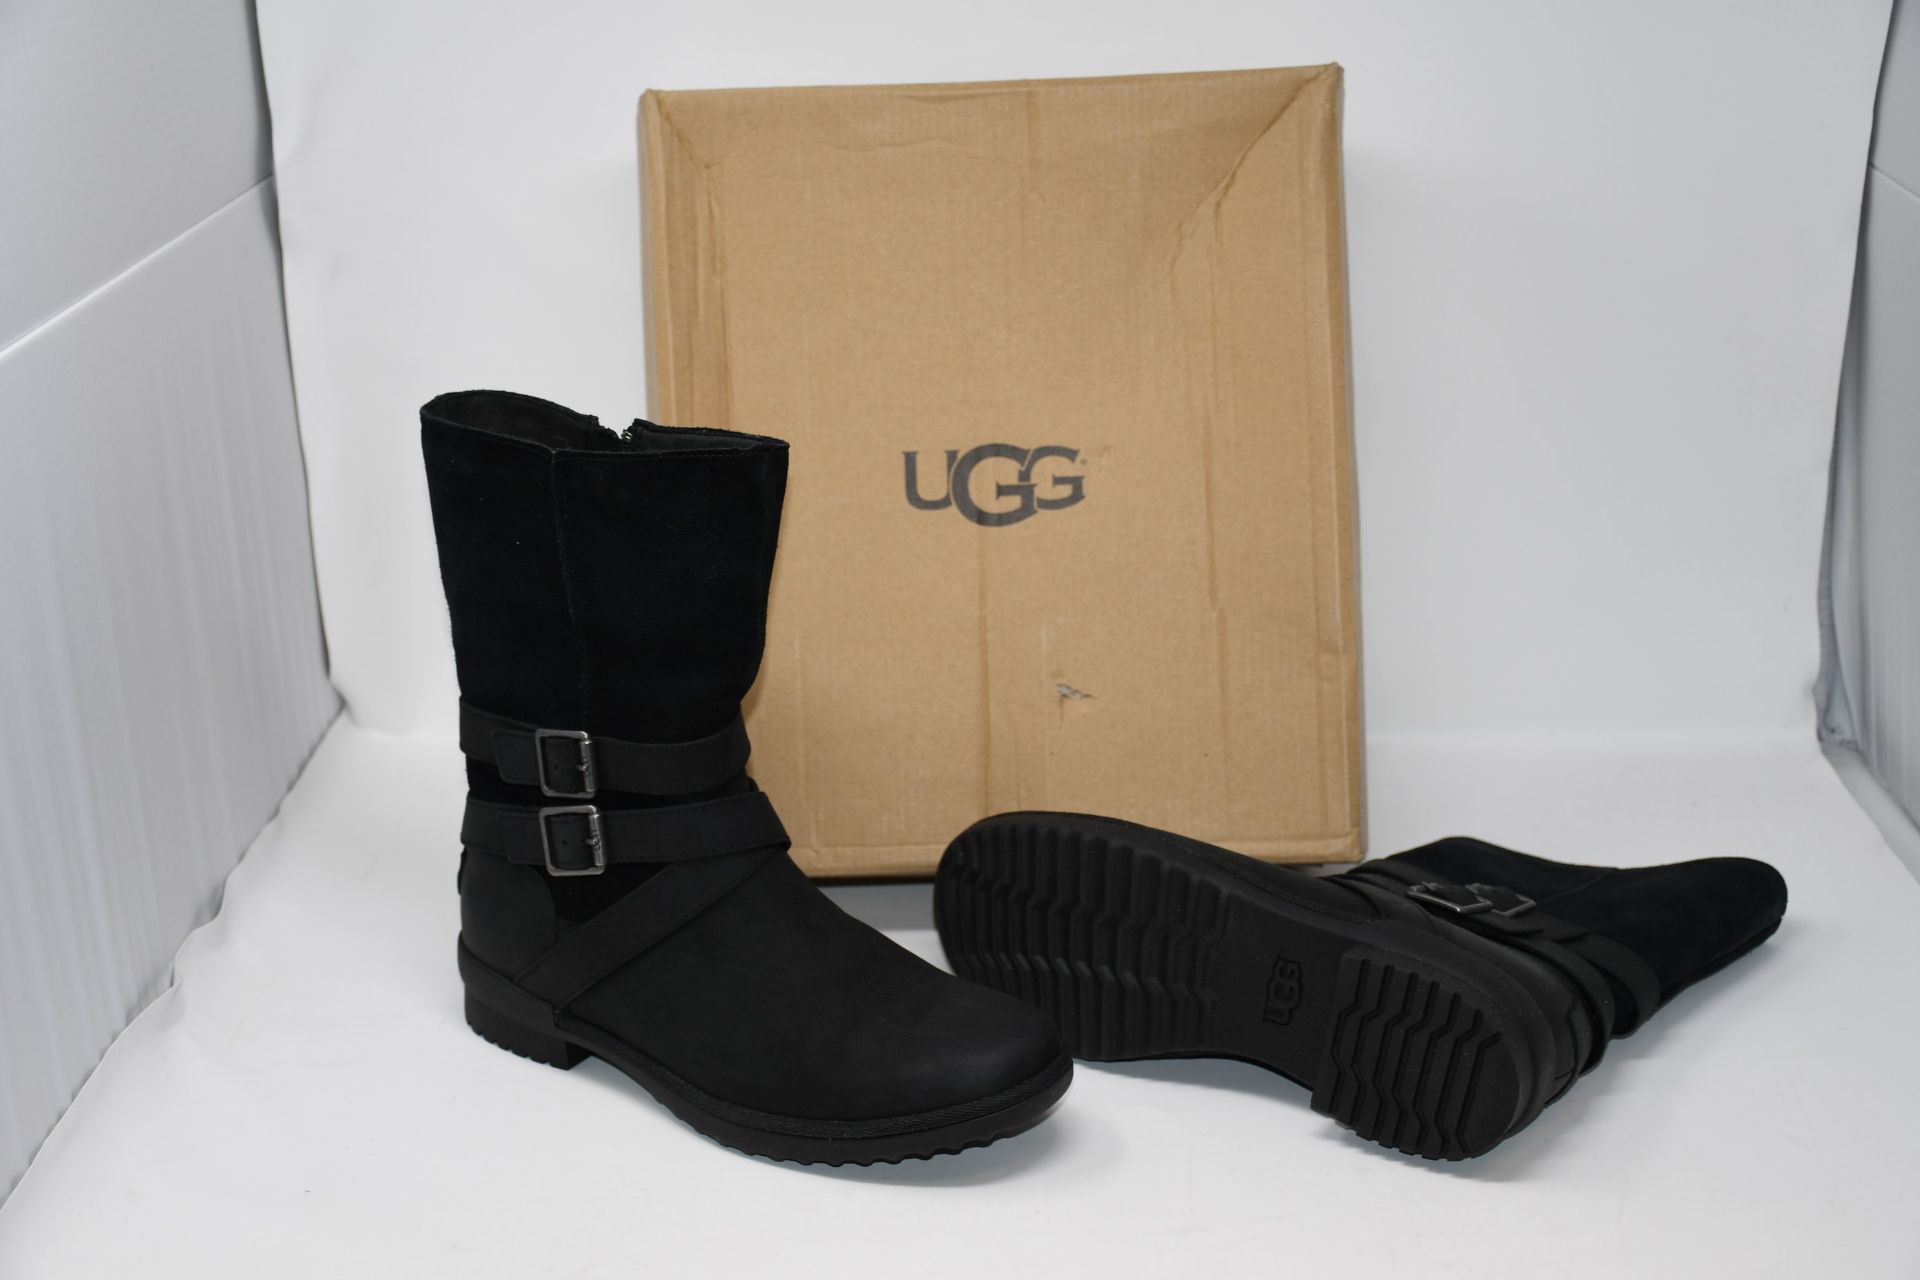 One as new UGG Lorna Waterproof Leather Black Boots size UK 7 (1095155).